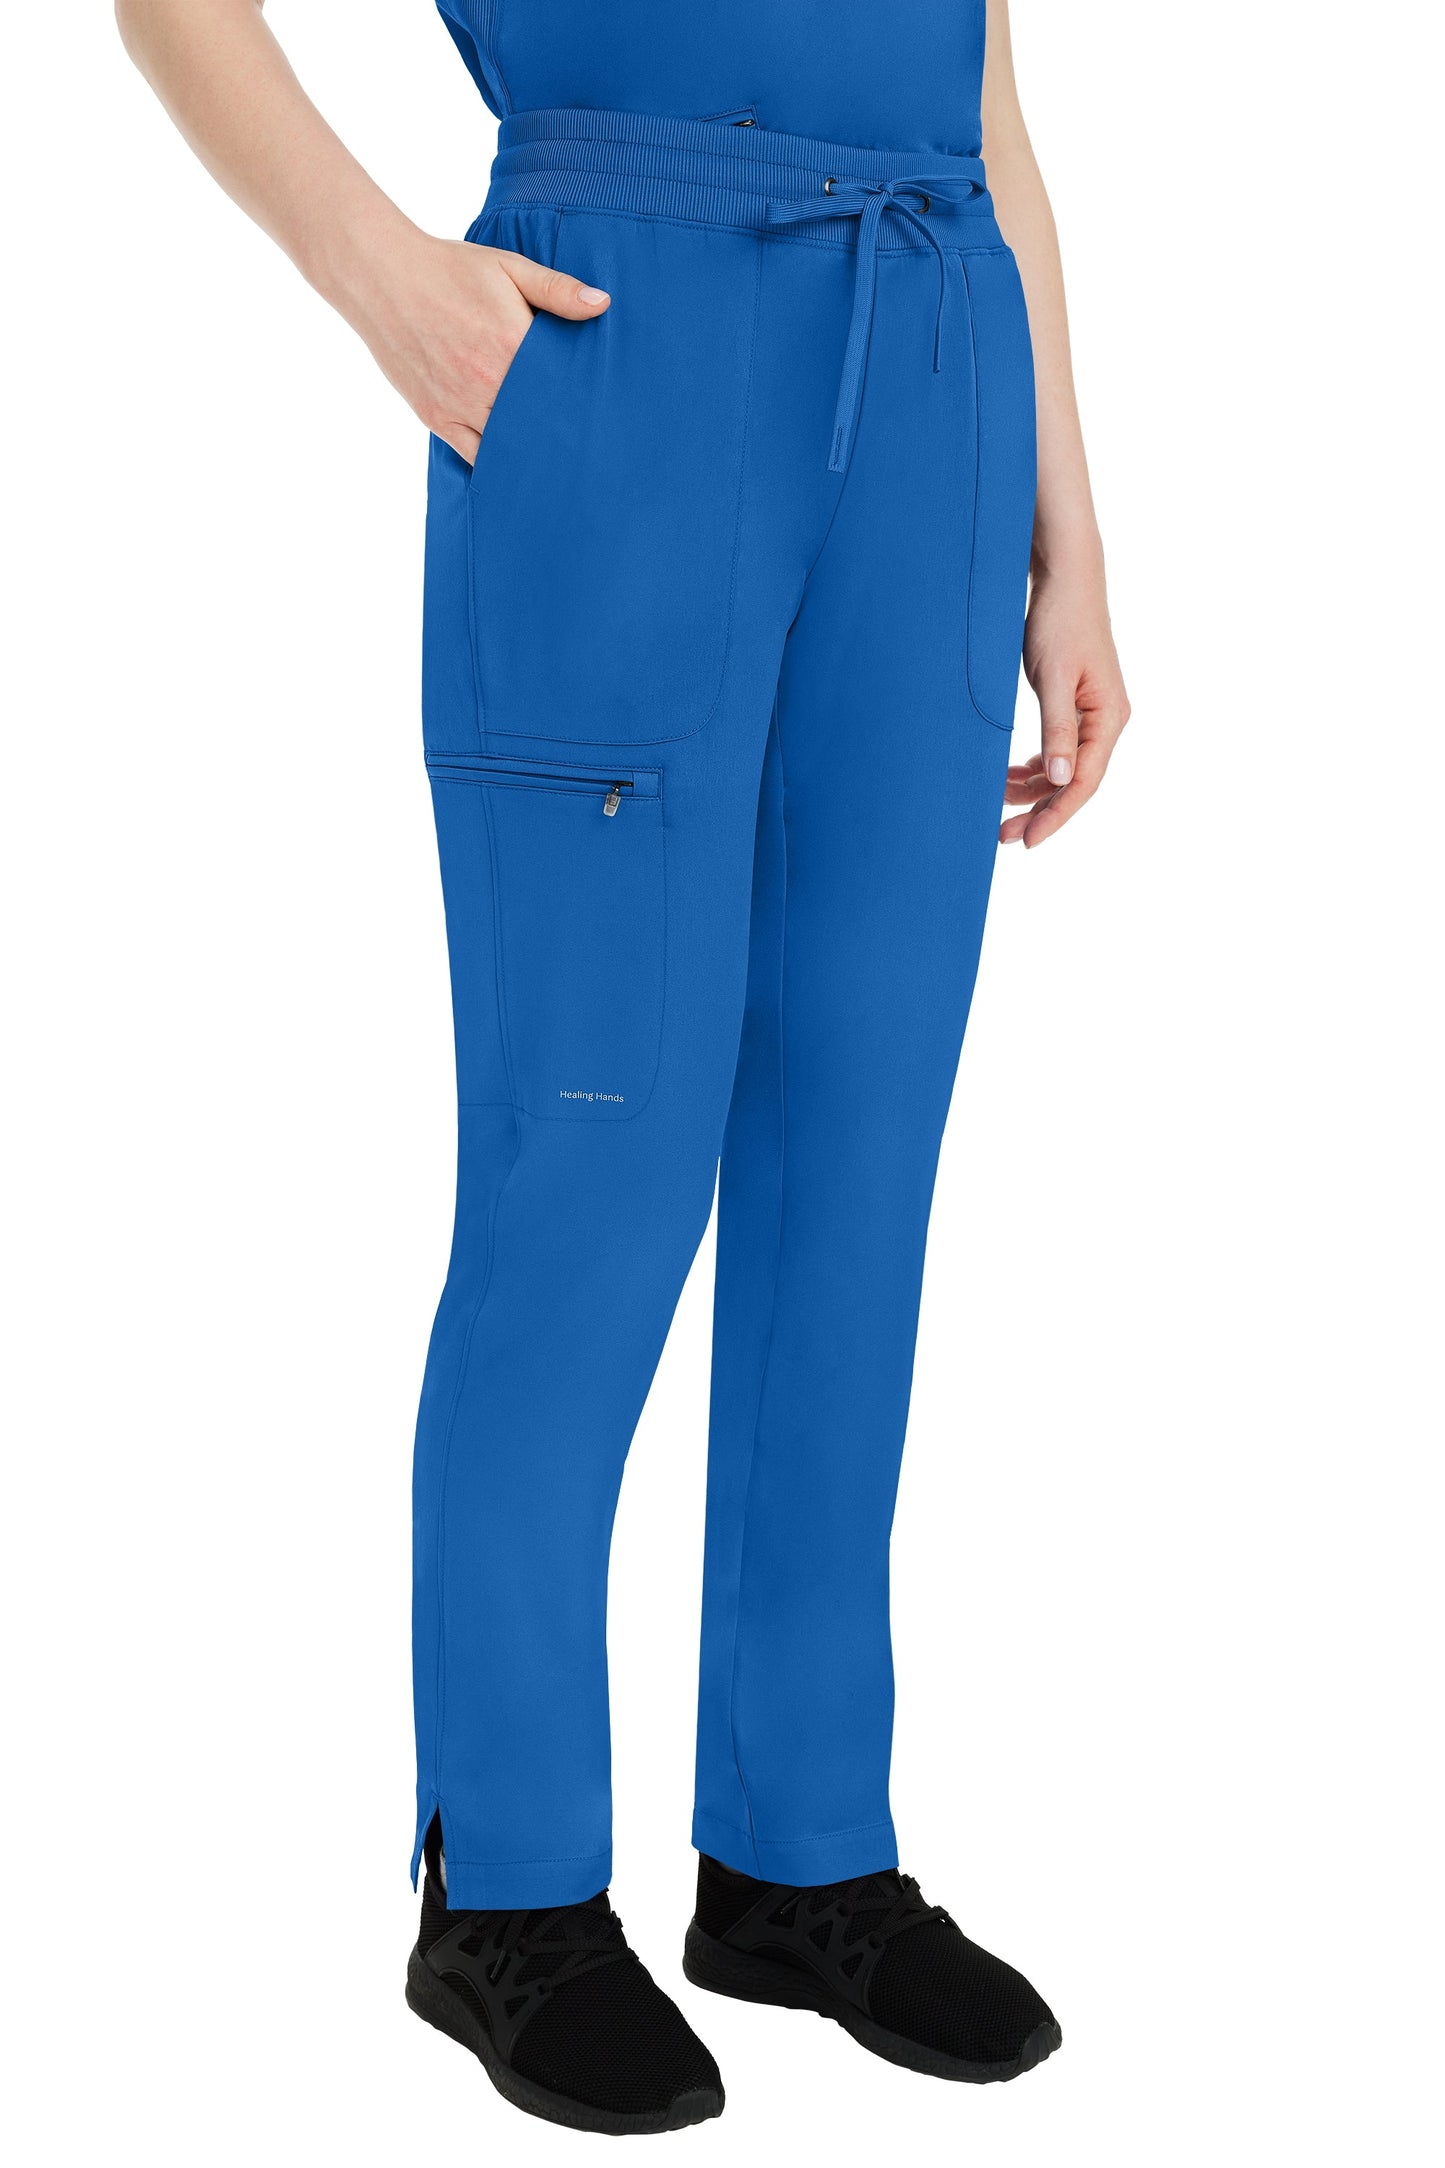 Healing Hands HH Works Tall 9530 Raine Pant